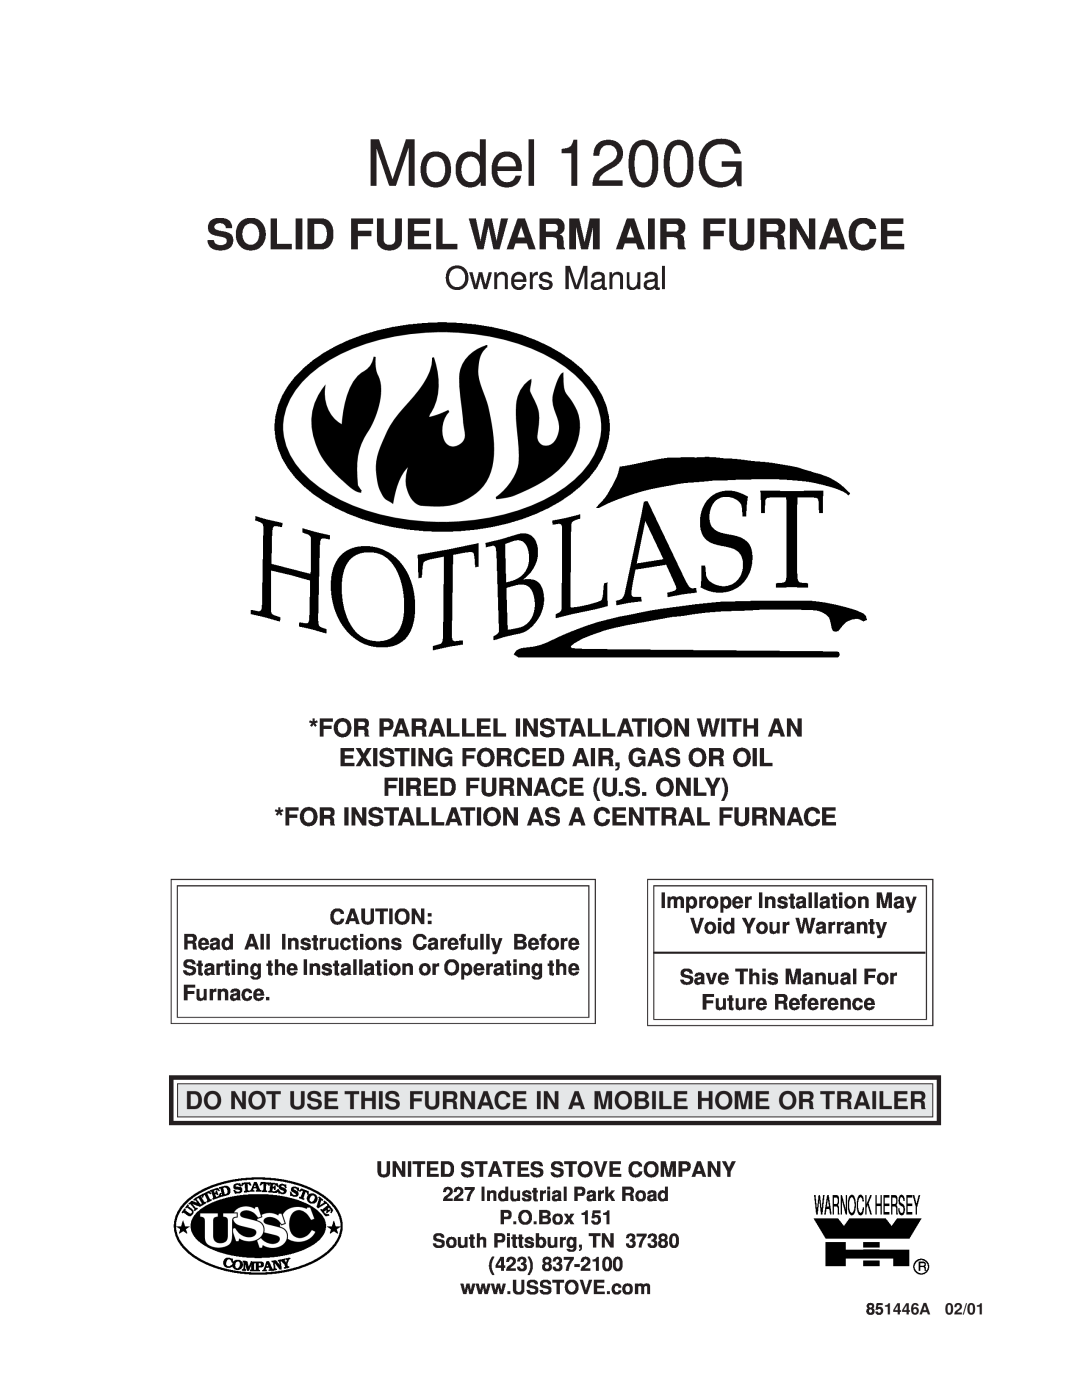 United States Stove owner manual For Parallel Installation With An, Existing Forced Air, Gas Or Oil, Model 1200G, Ussc 